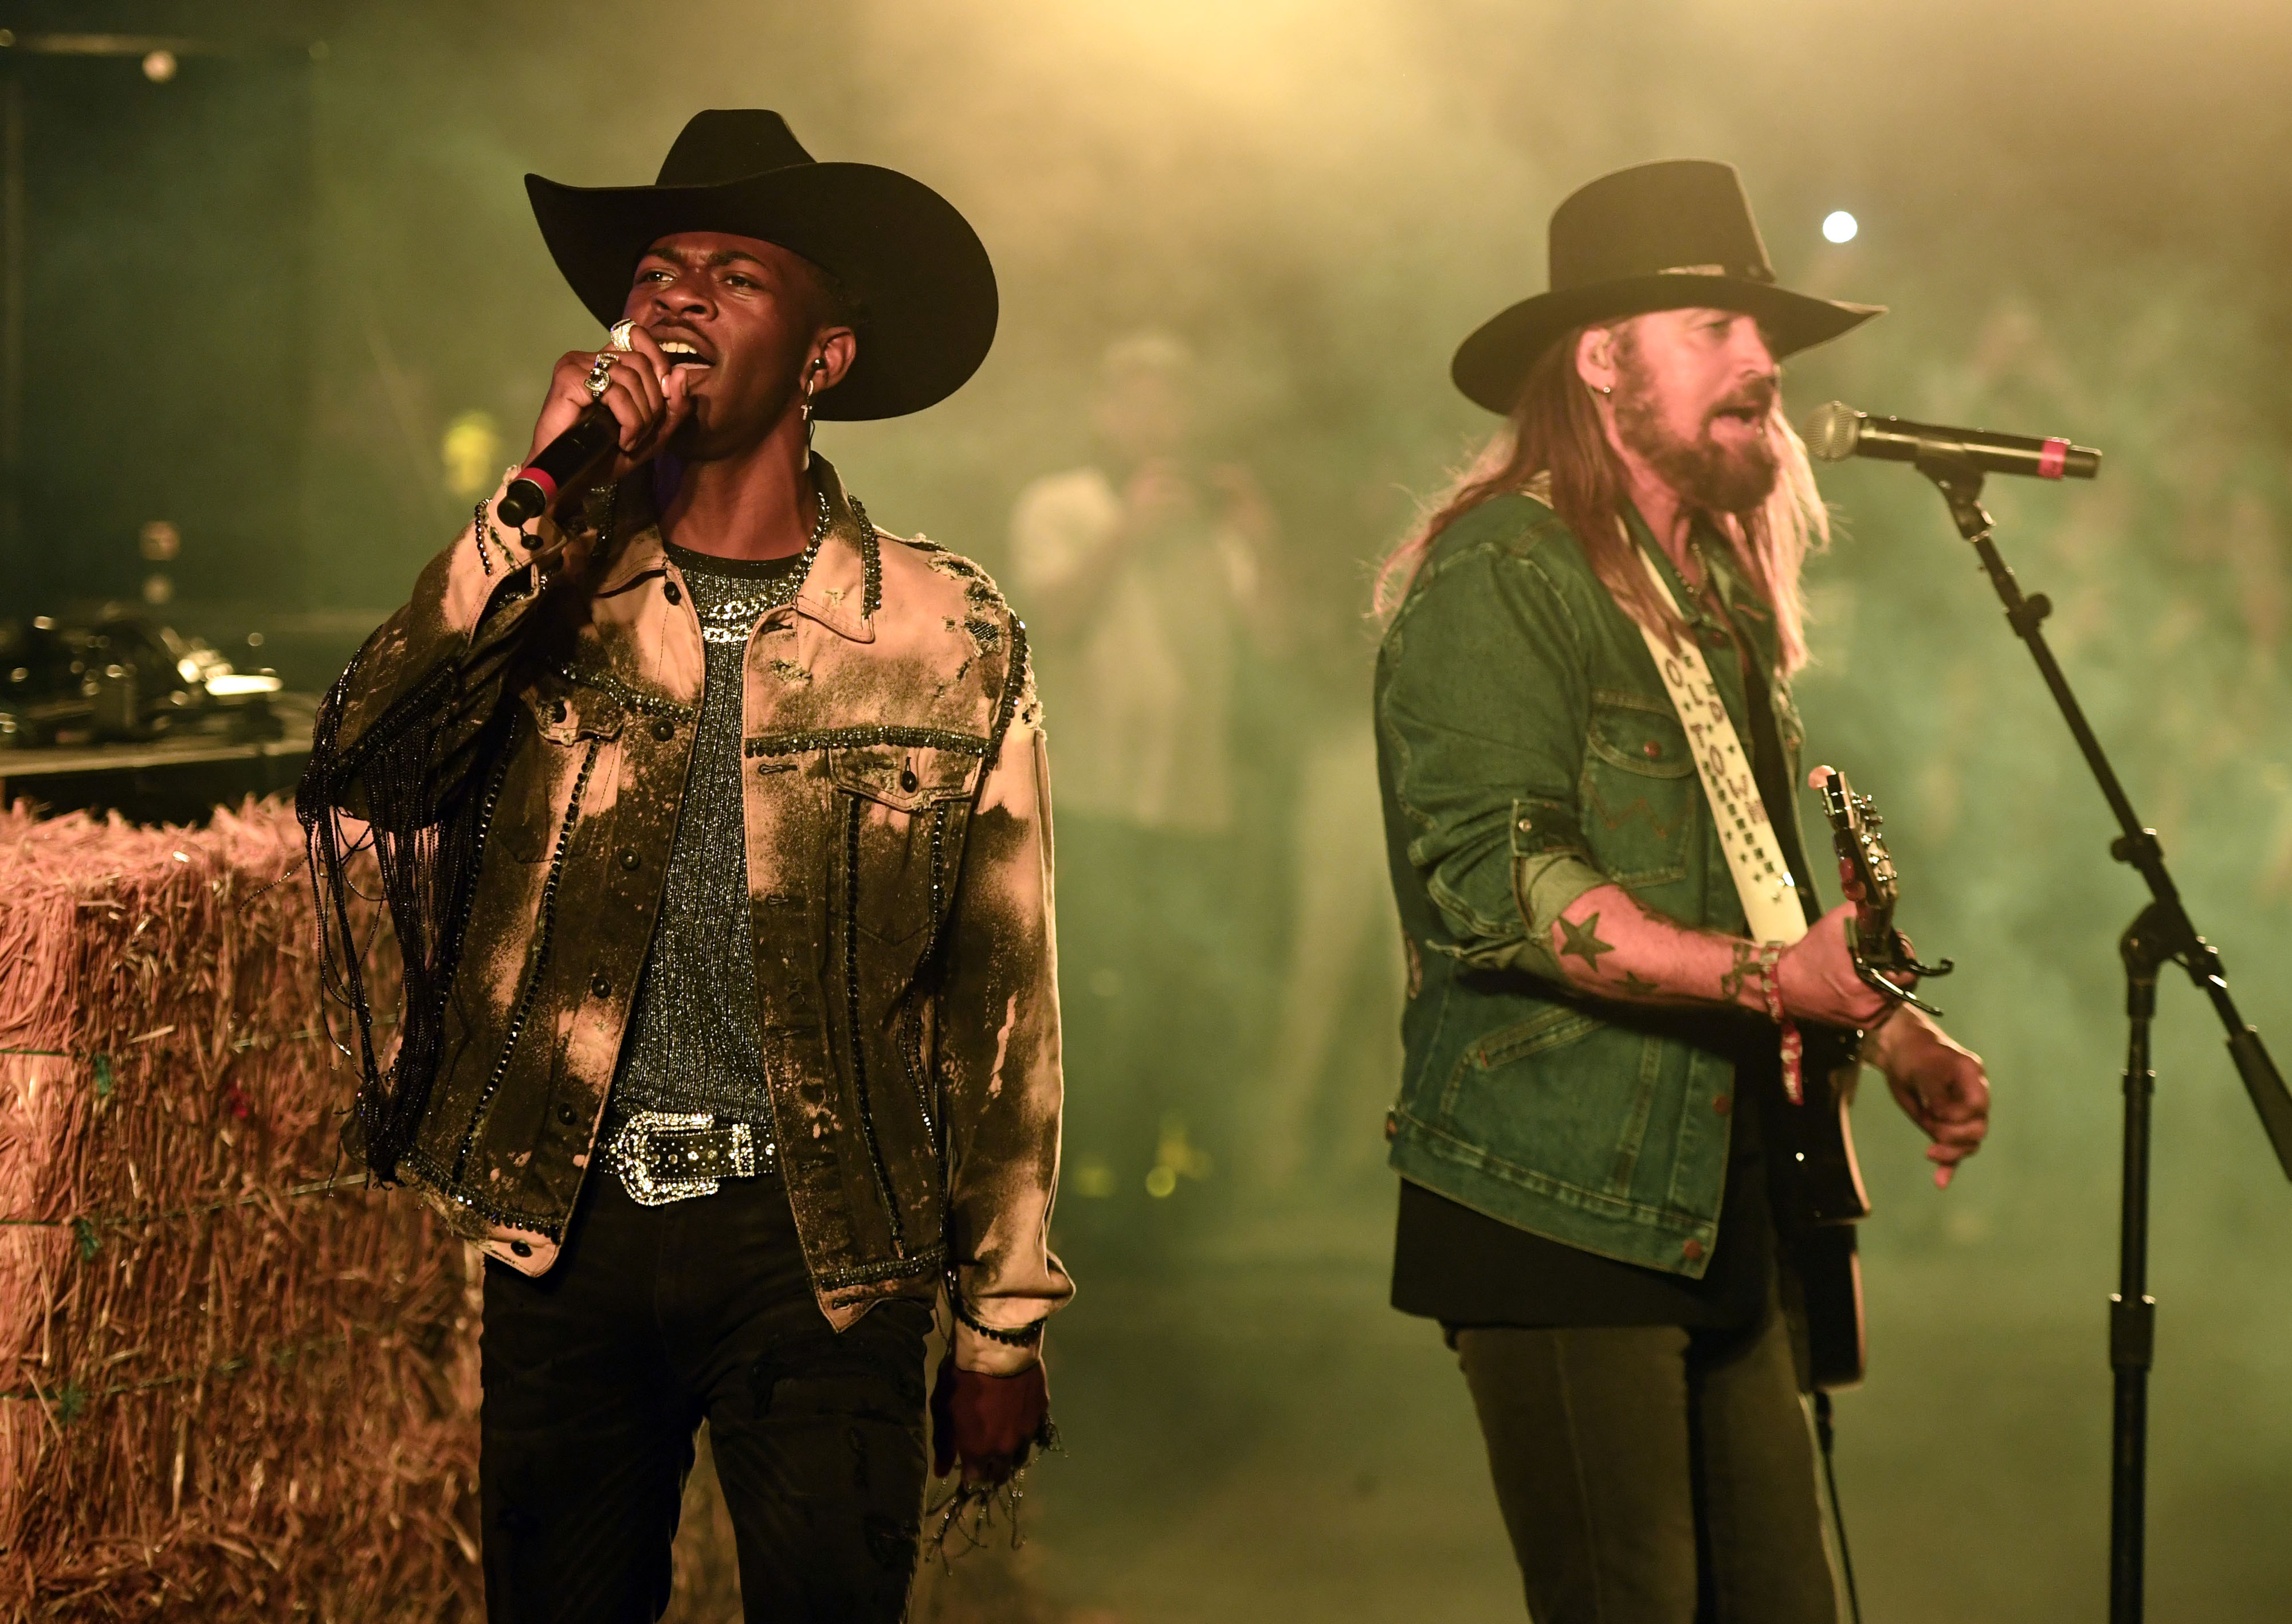 Lil Nas X f/ Billy Ray Cyrus, “Old Town Road”